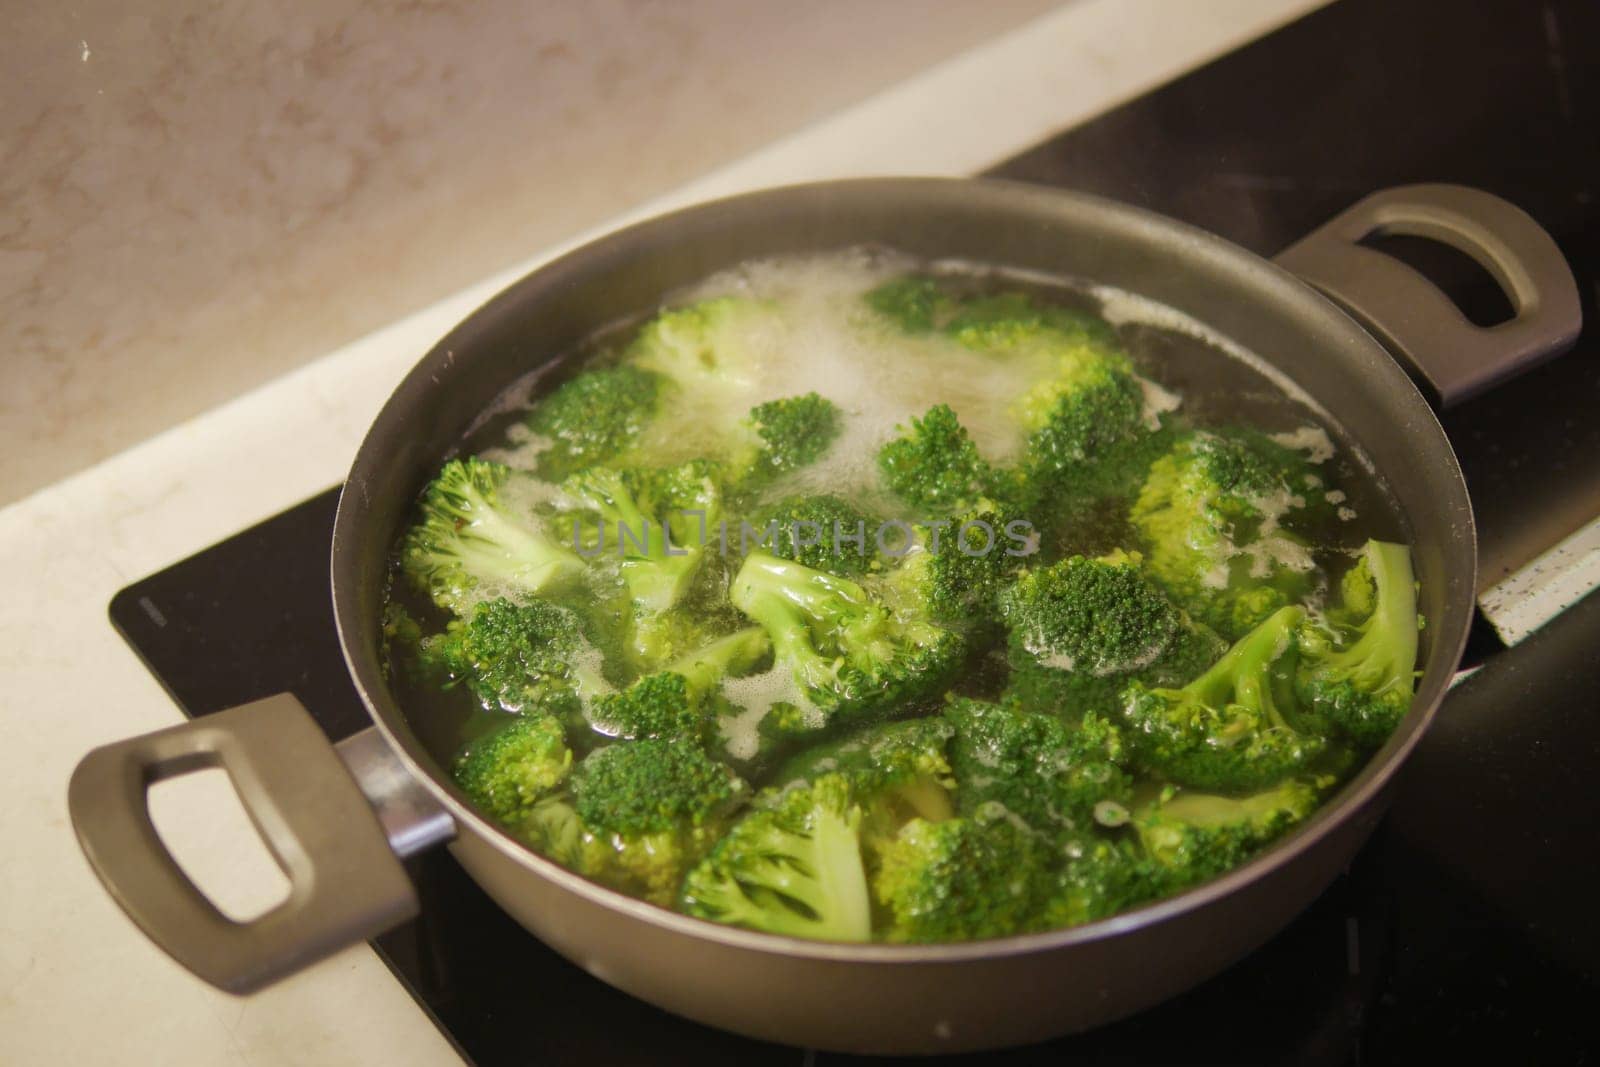 cooking broccoli in pan on electric stove by towfiq007